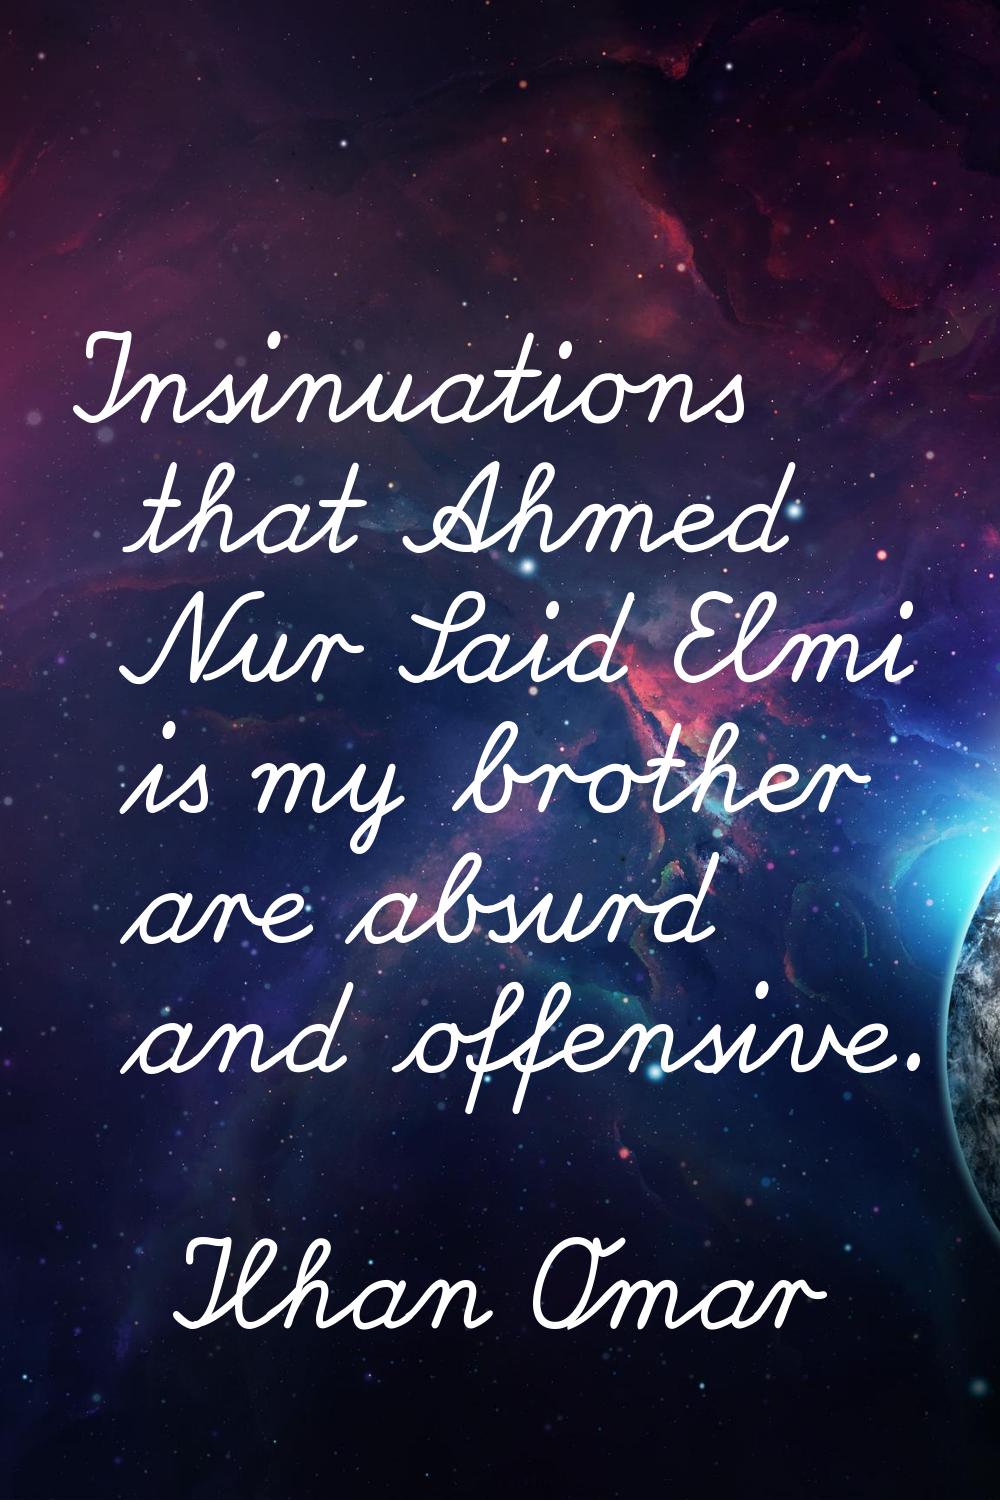 Insinuations that Ahmed Nur Said Elmi is my brother are absurd and offensive.